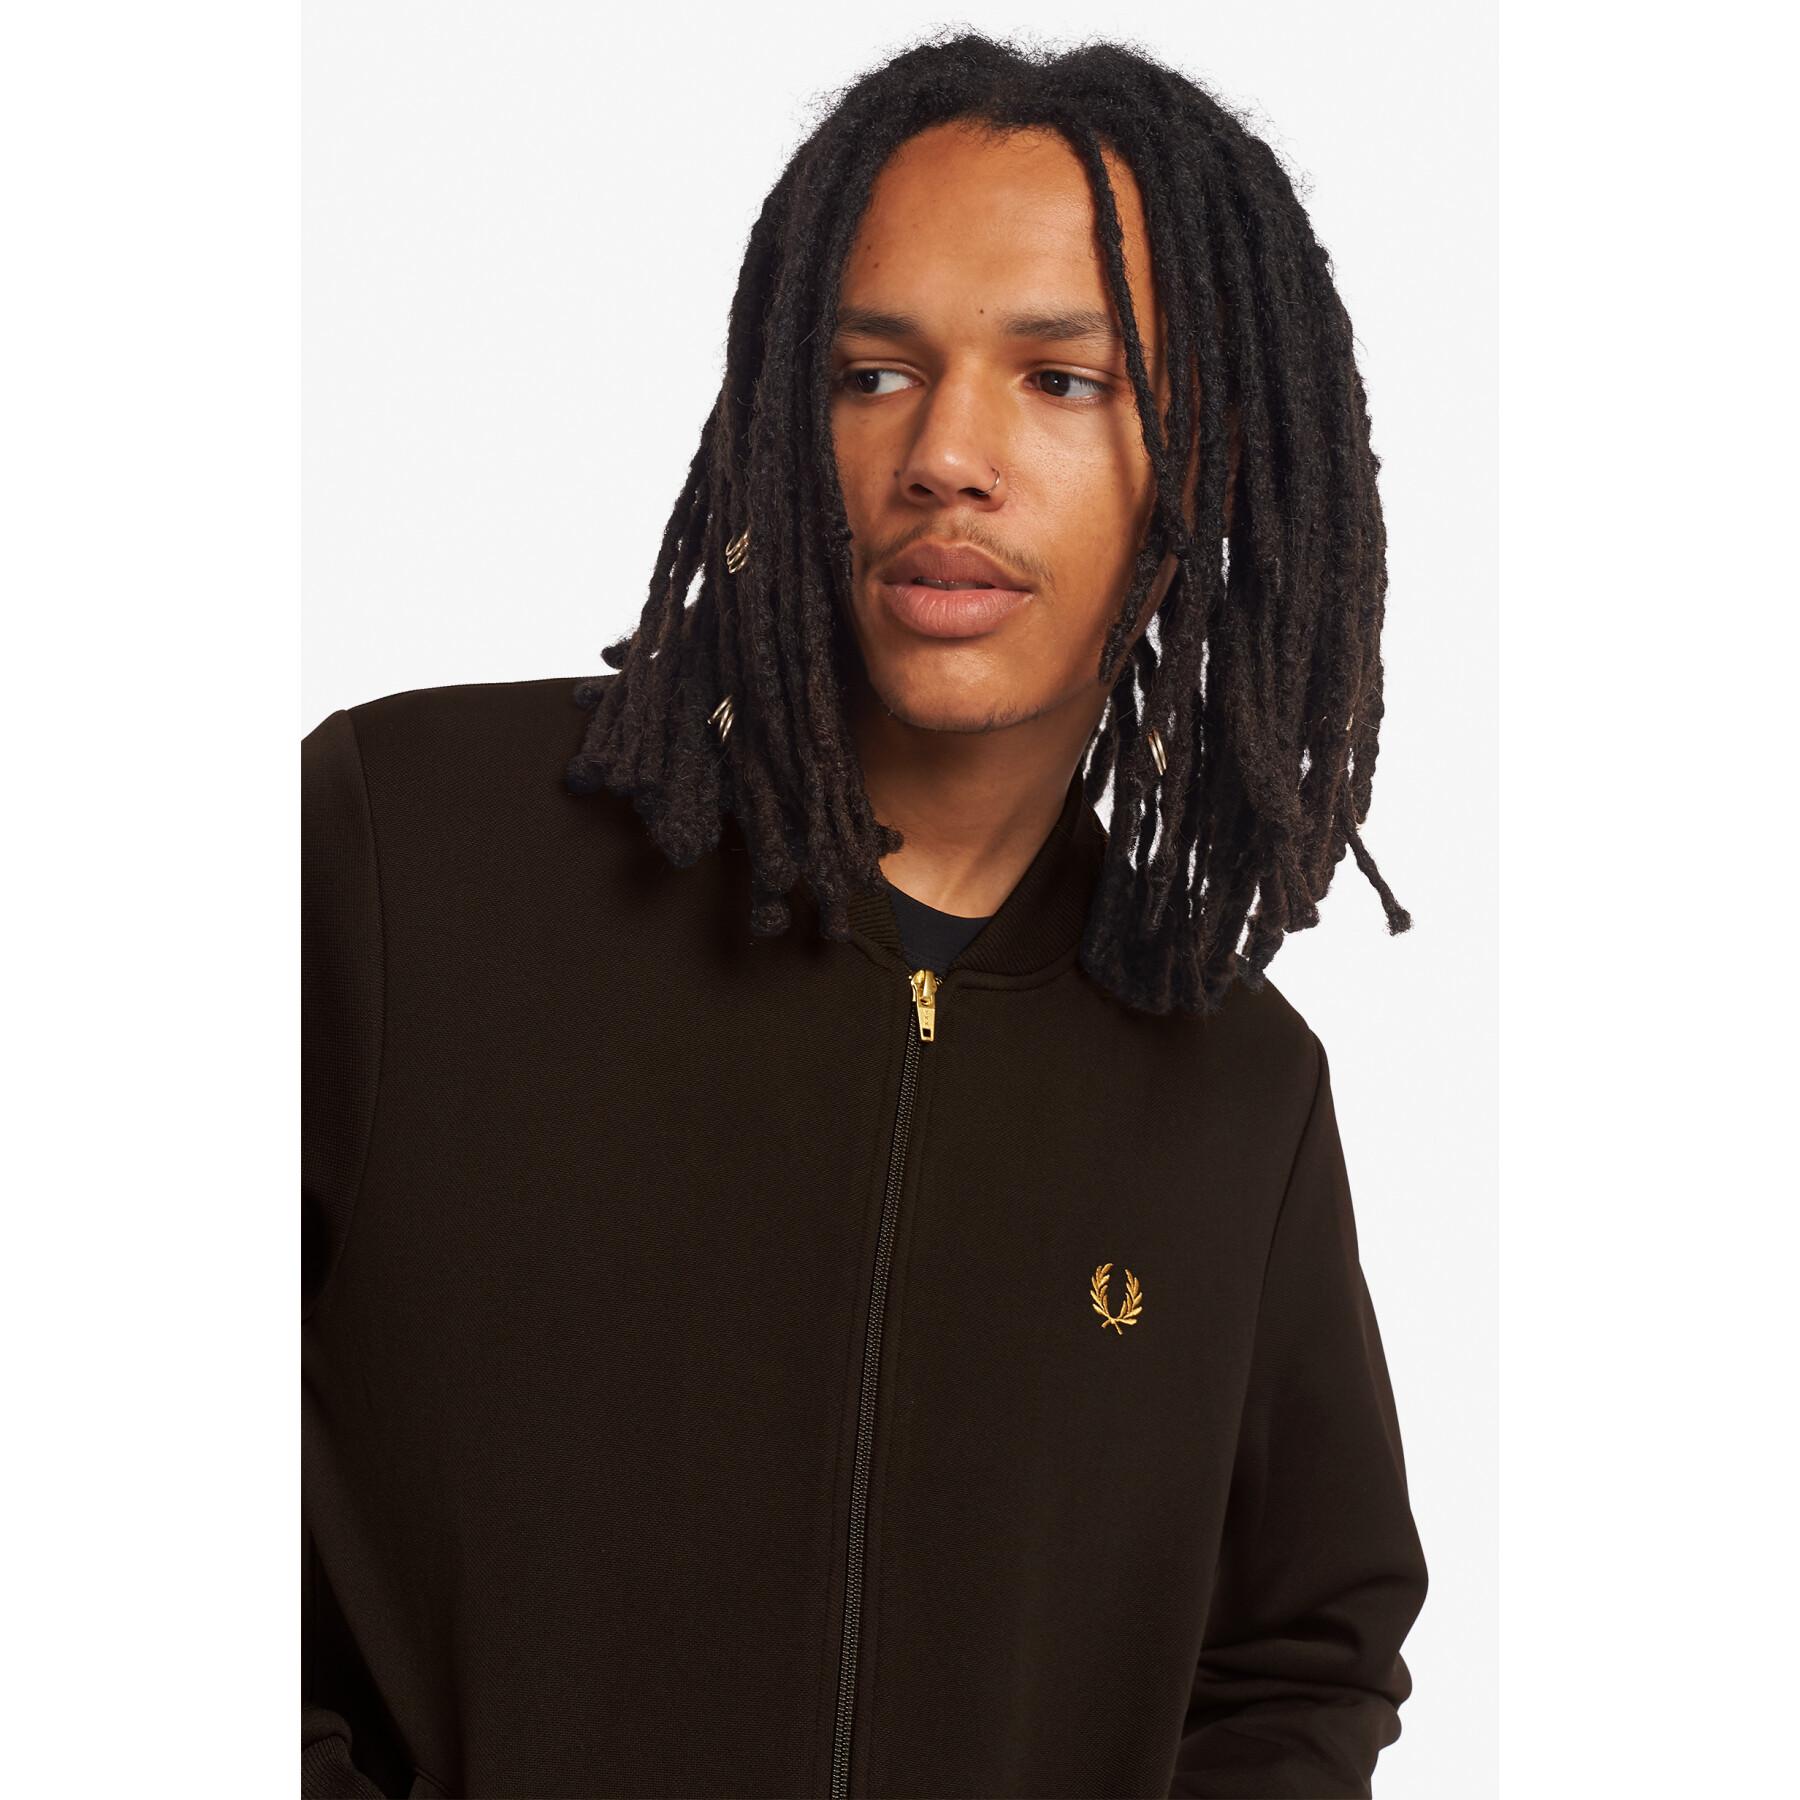 Textured piqué sweat jacket Fred Perry